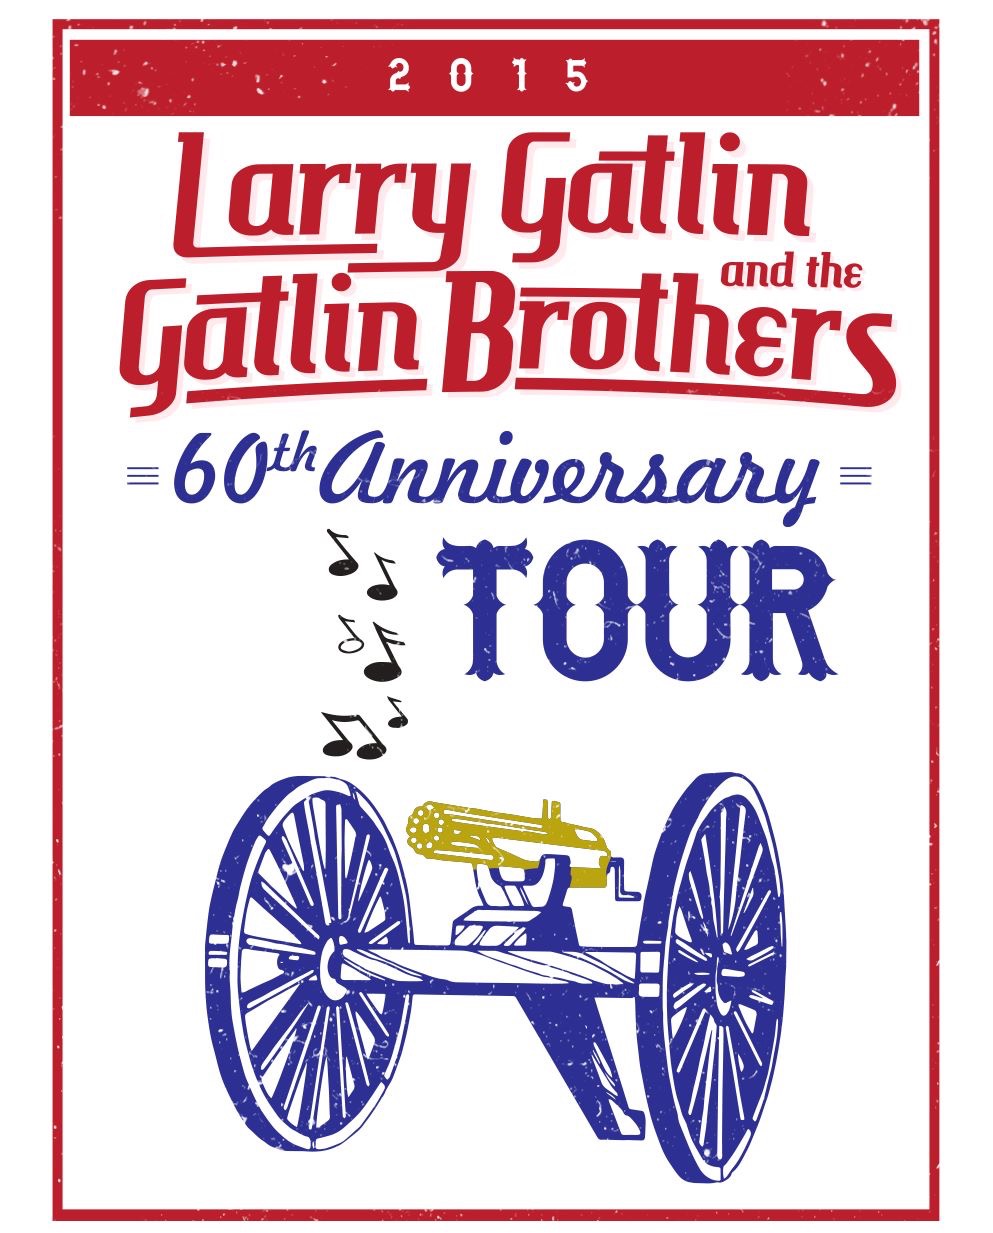 Gatlin Brothers 60th Anniversary Tour Poster